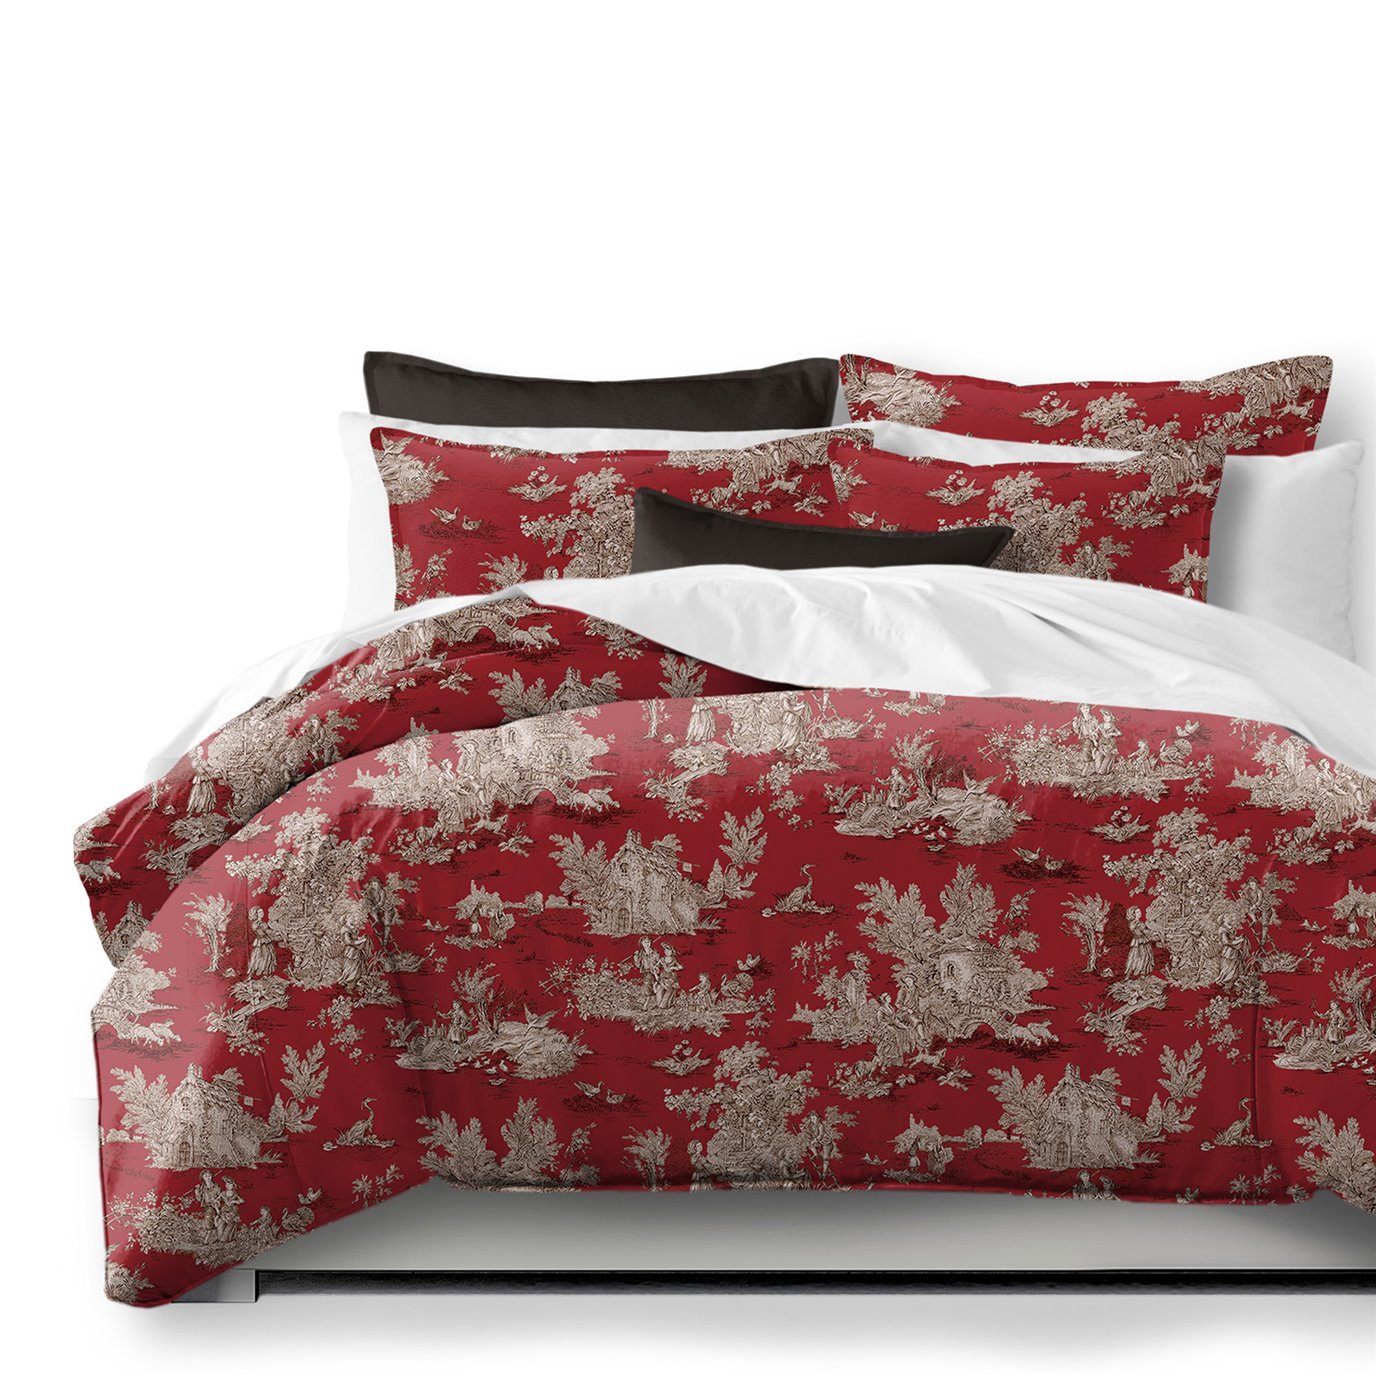 Chateau Red/Black Coverlet and Pillow Sham(s) Set - Size Full